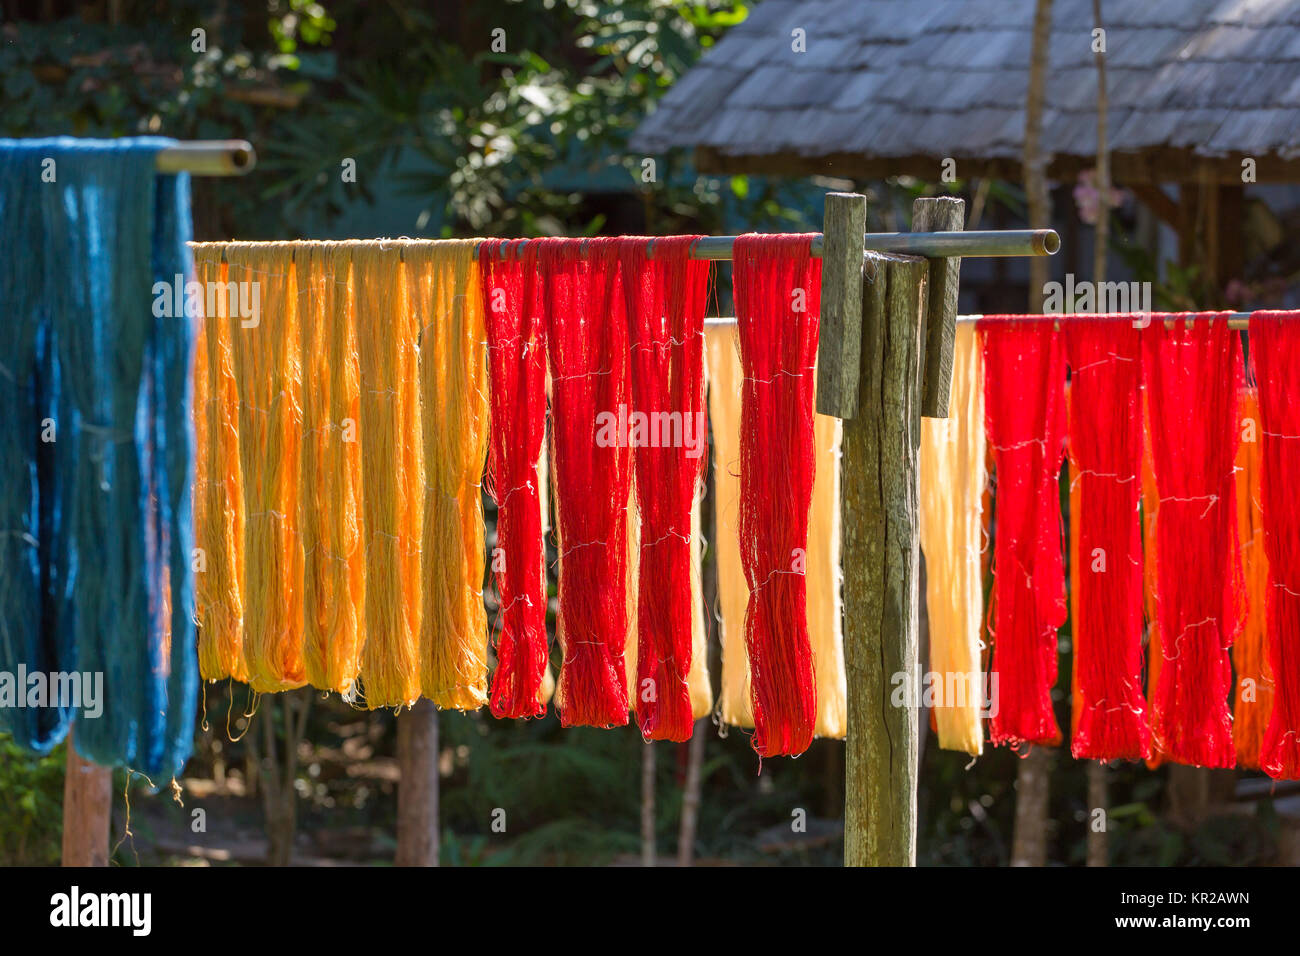 Colorful fabric hanging to dry after traditional dye processshot in Luang Prabang, Laos Stock Photo